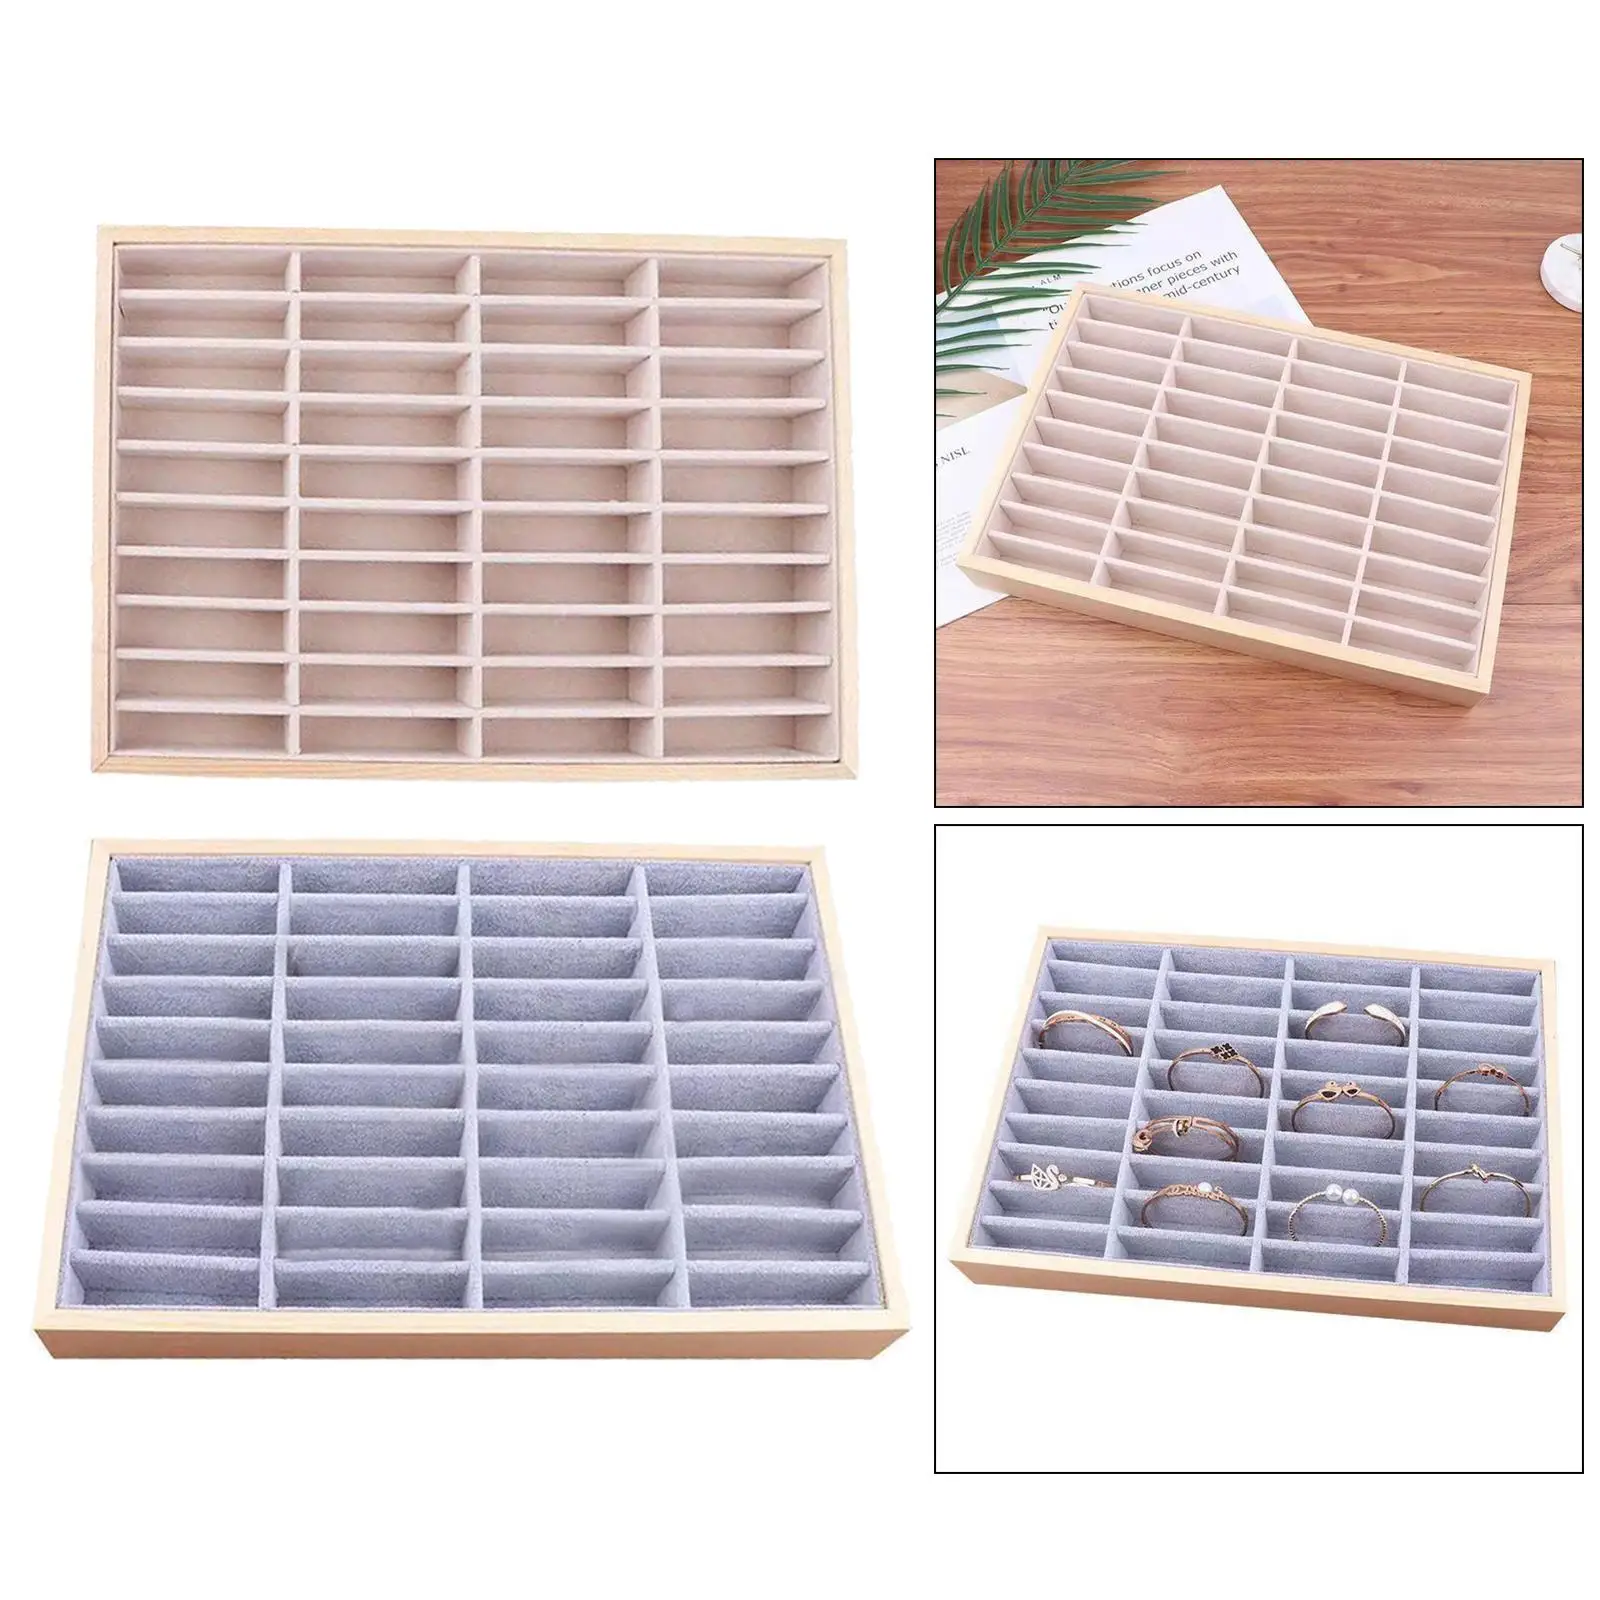 Wood Velvet Jewelry Organizer Display Case Tray Box for Necklaces 40 Grids